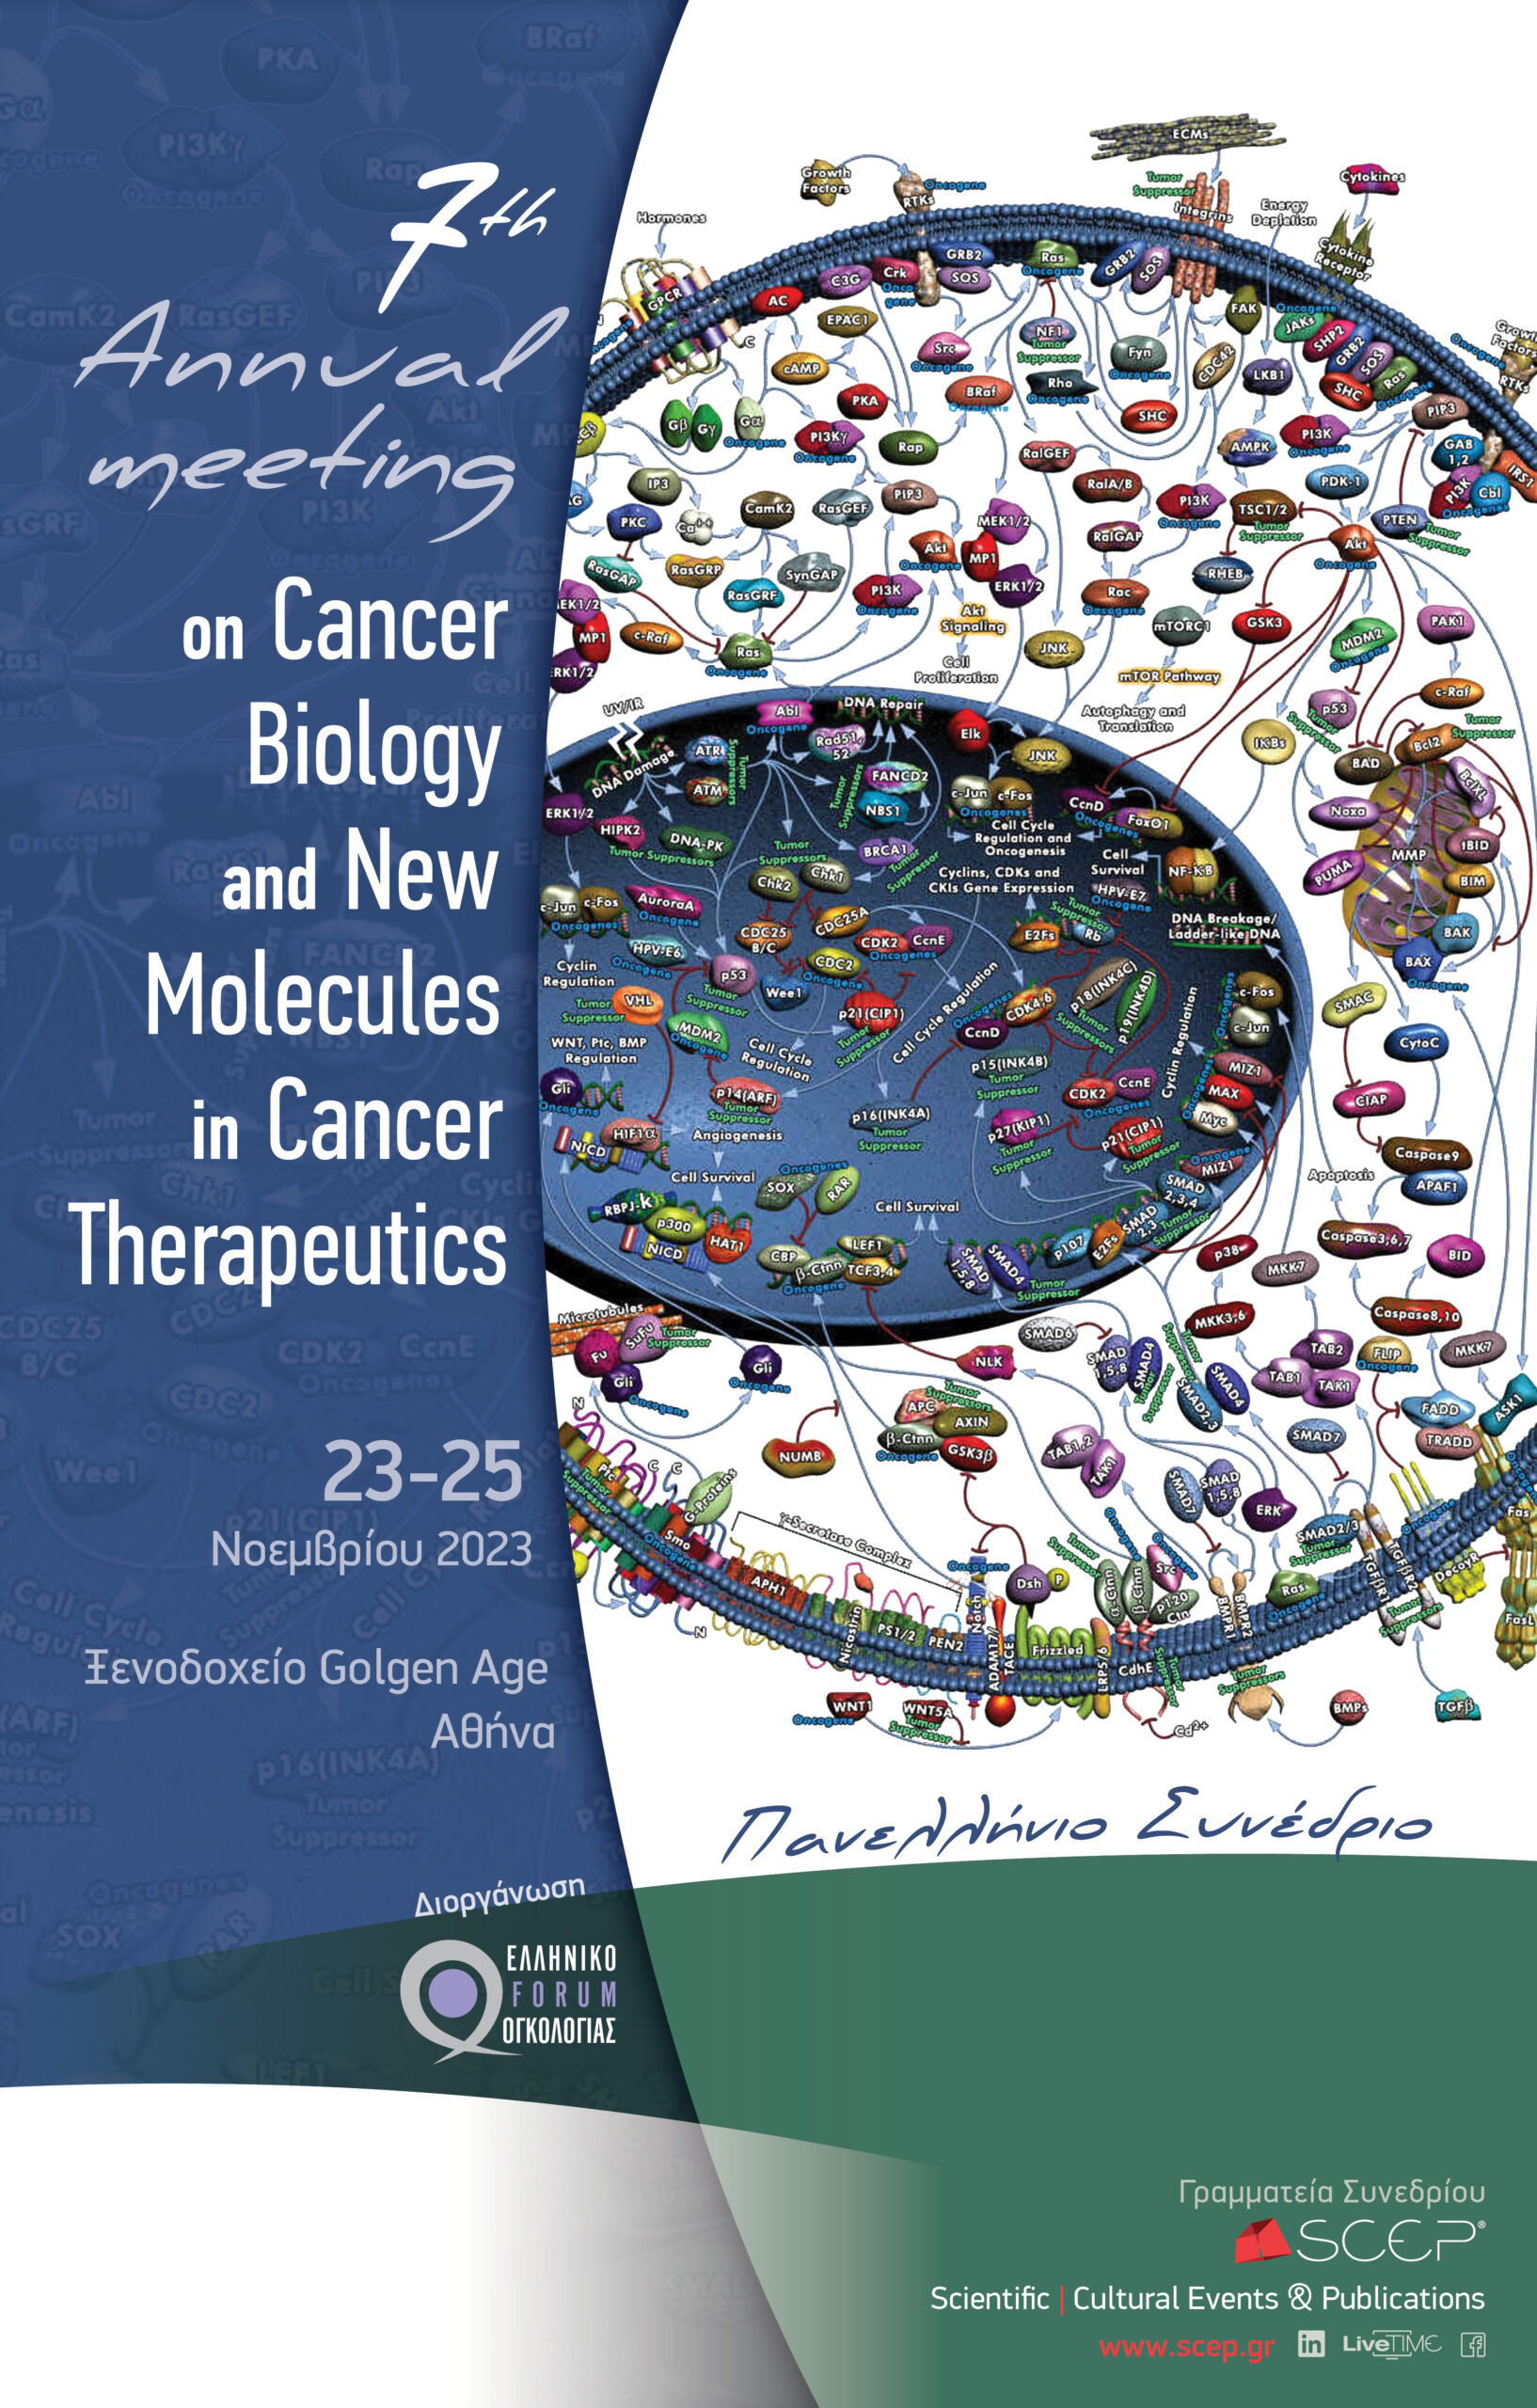 7th Annual Meeting on Cancer Biology & New  Molecules in Cancer Therapeutics, Αθήνα, 23-25/11/2023